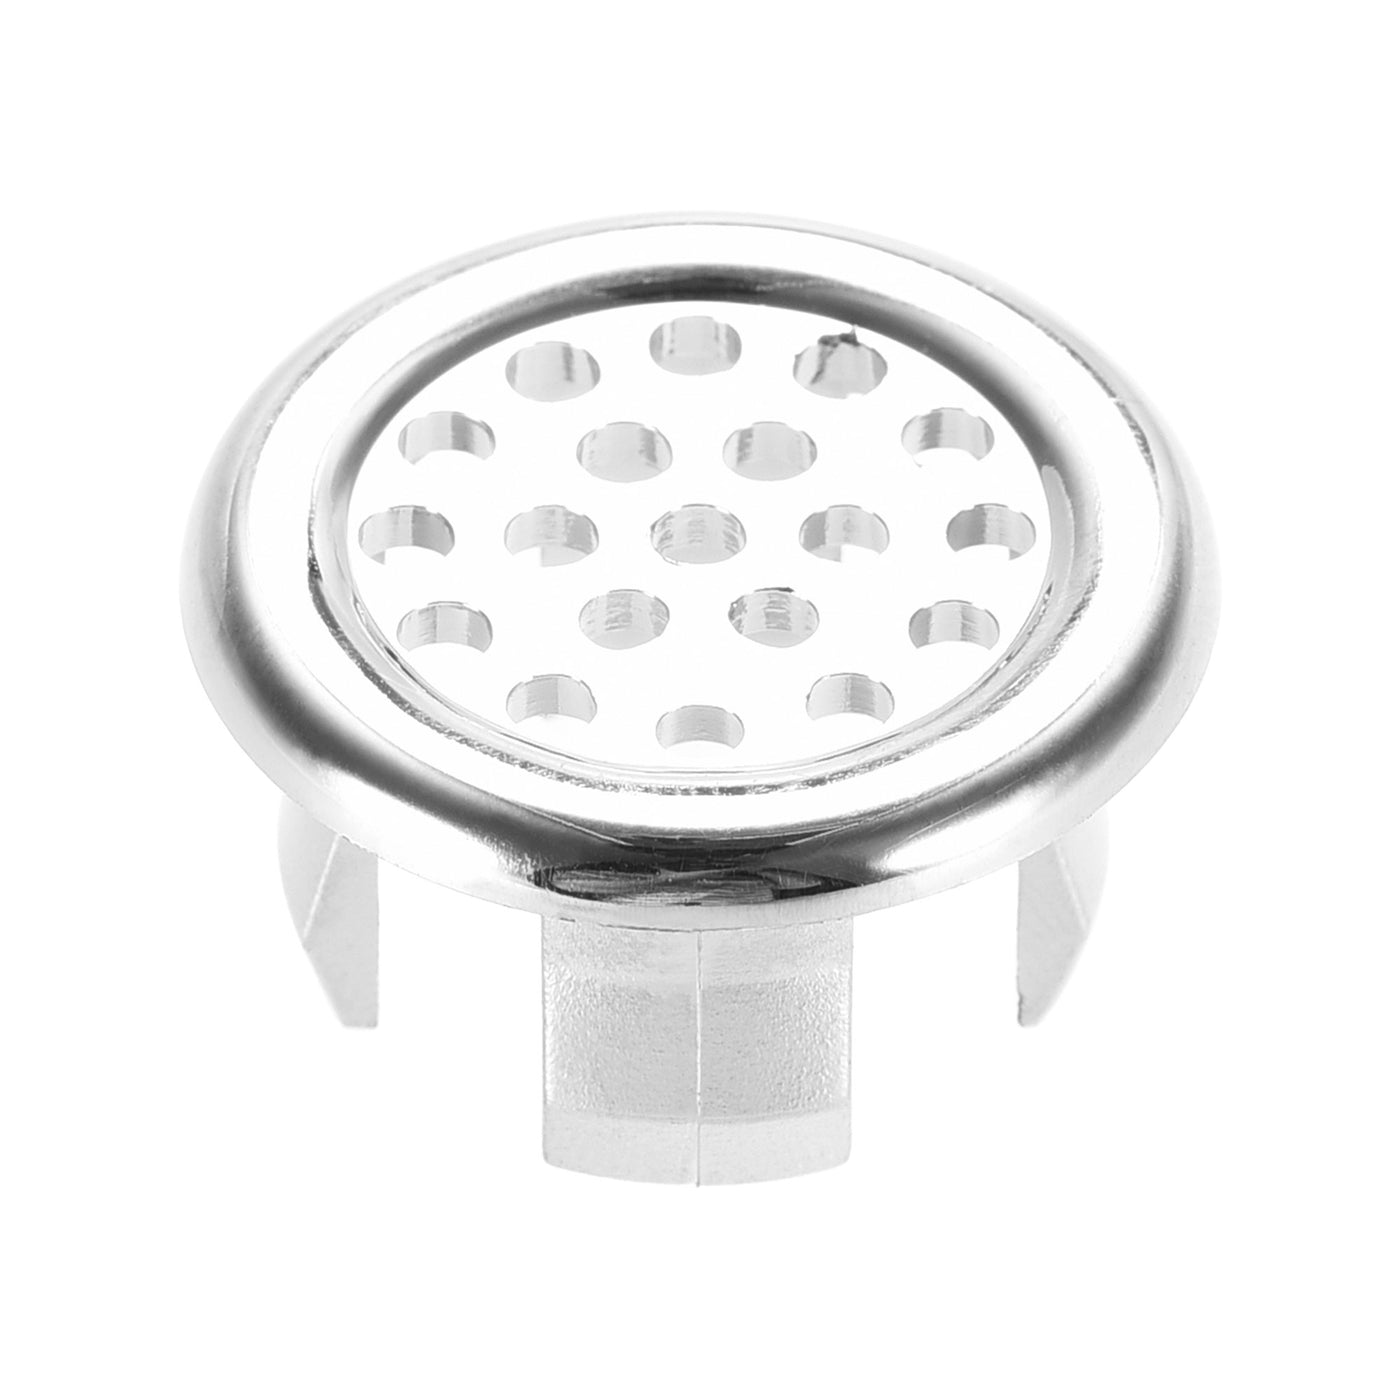 uxcell Uxcell Sink Basin Trim Overflow Cover Insert in Mesh Hole Round Caps Silver Tone 12pcs